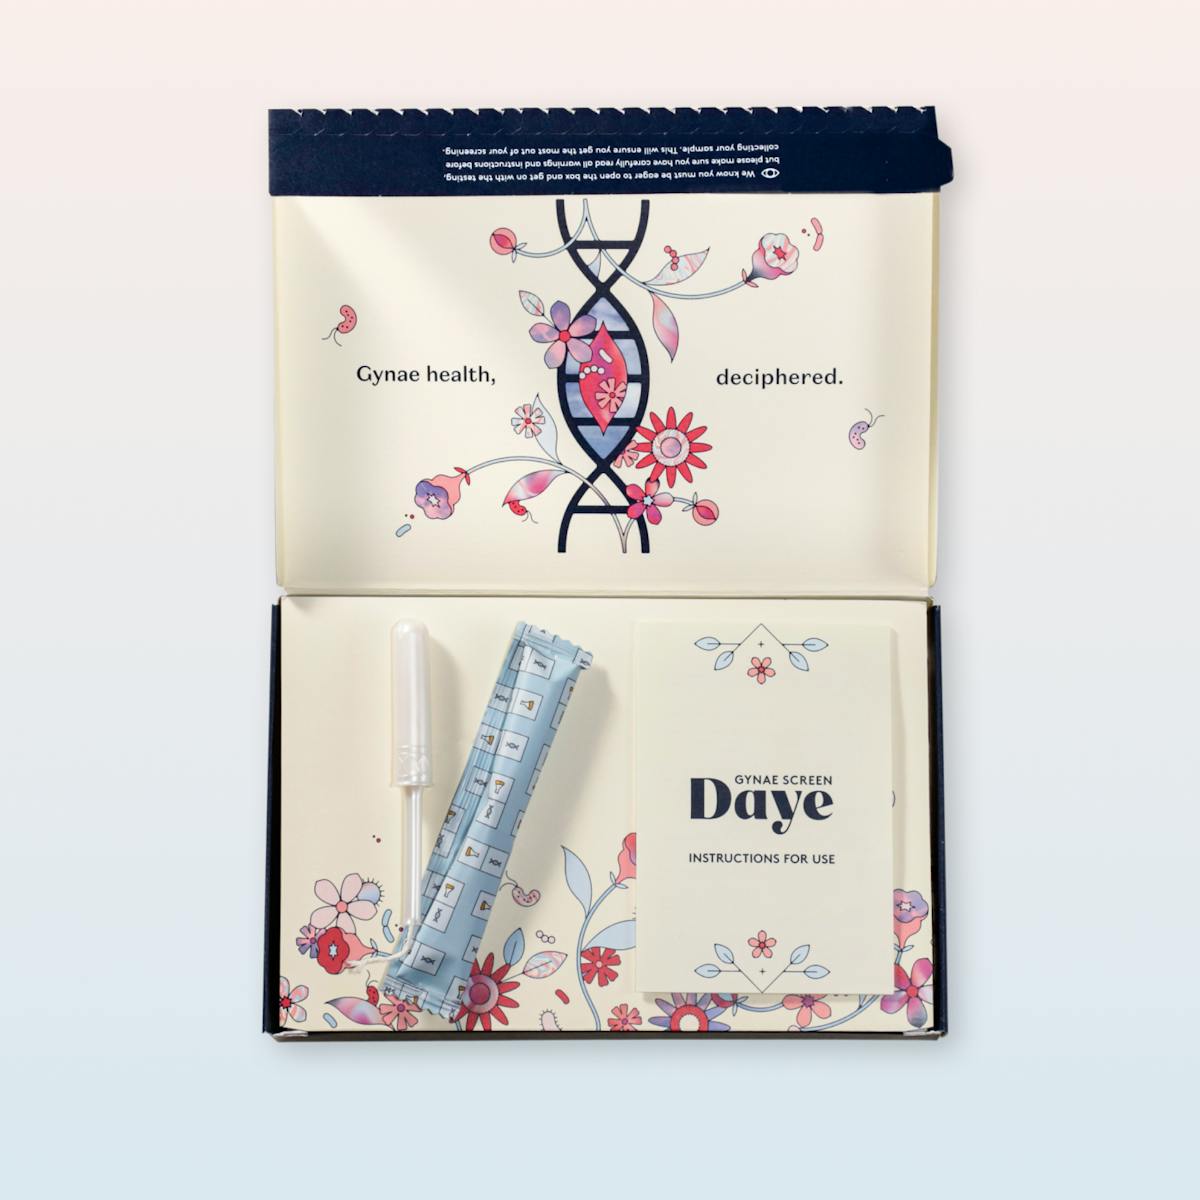 Gynae health kit from Daye. The kit is open, showing a tampon applicator, a wrapped tampon, and an instruction booklet with floral designs. The text reads 'Gynae health, deciphered.